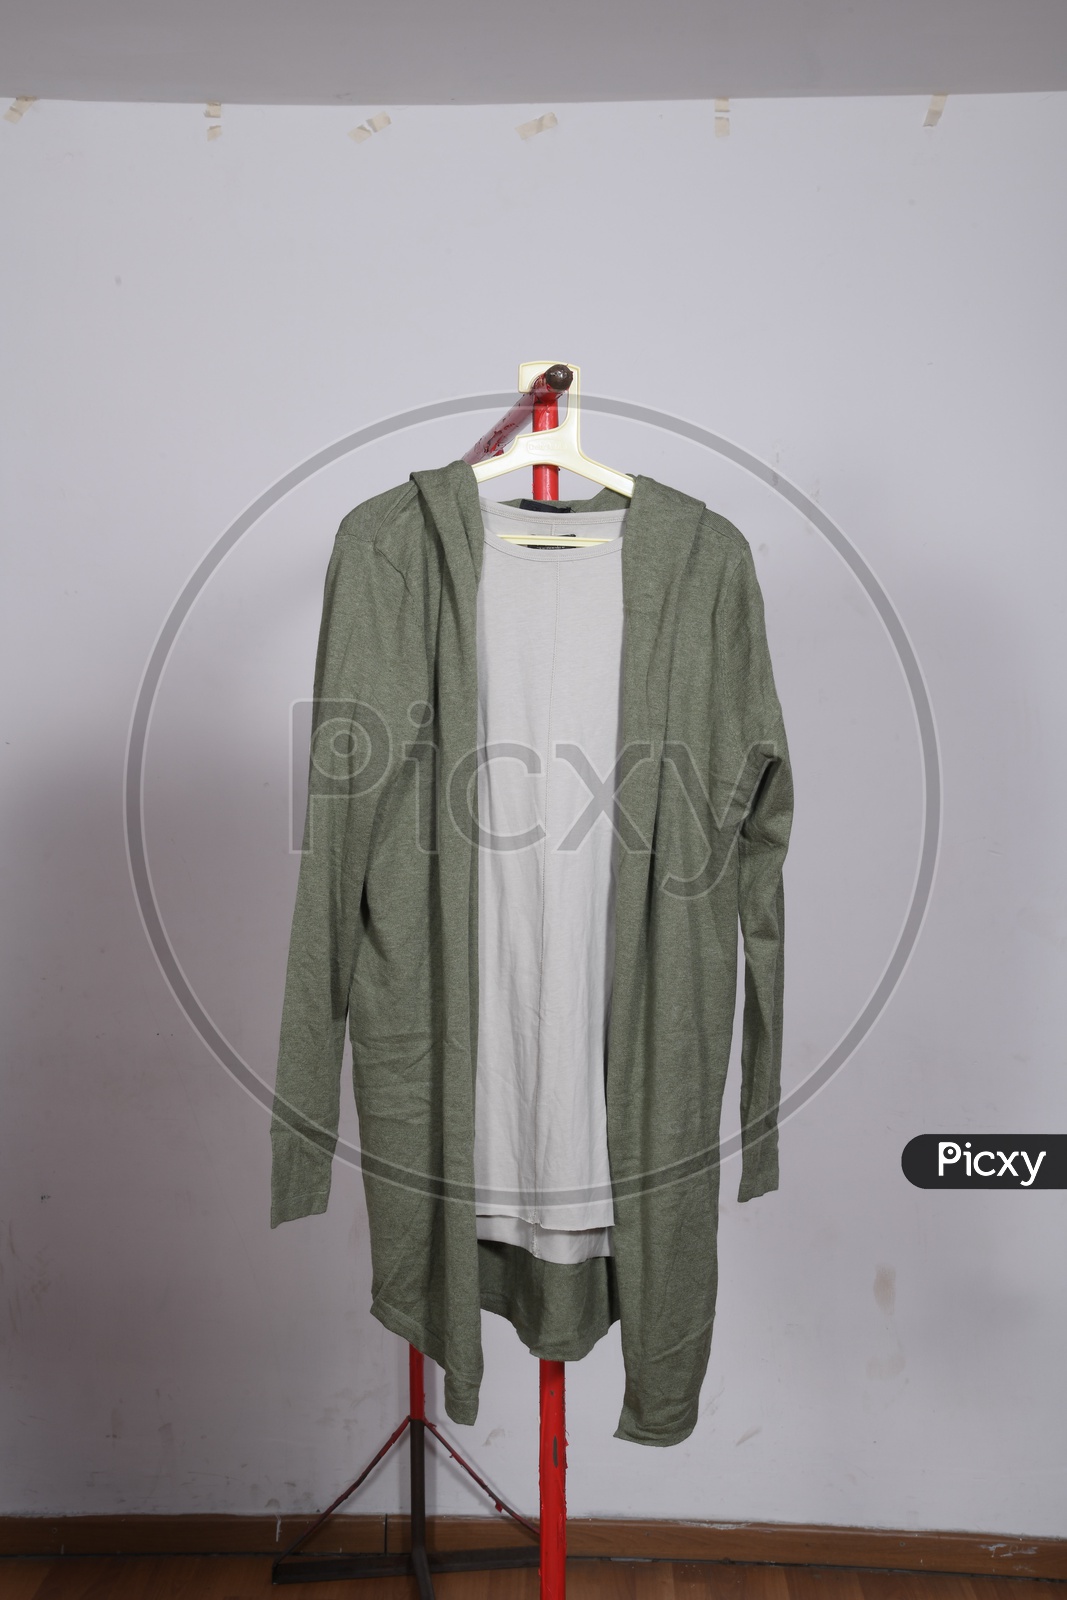 Designer Costumes Tshirt And Jacket   Display By Hanging To Hangers Over Isolated Background